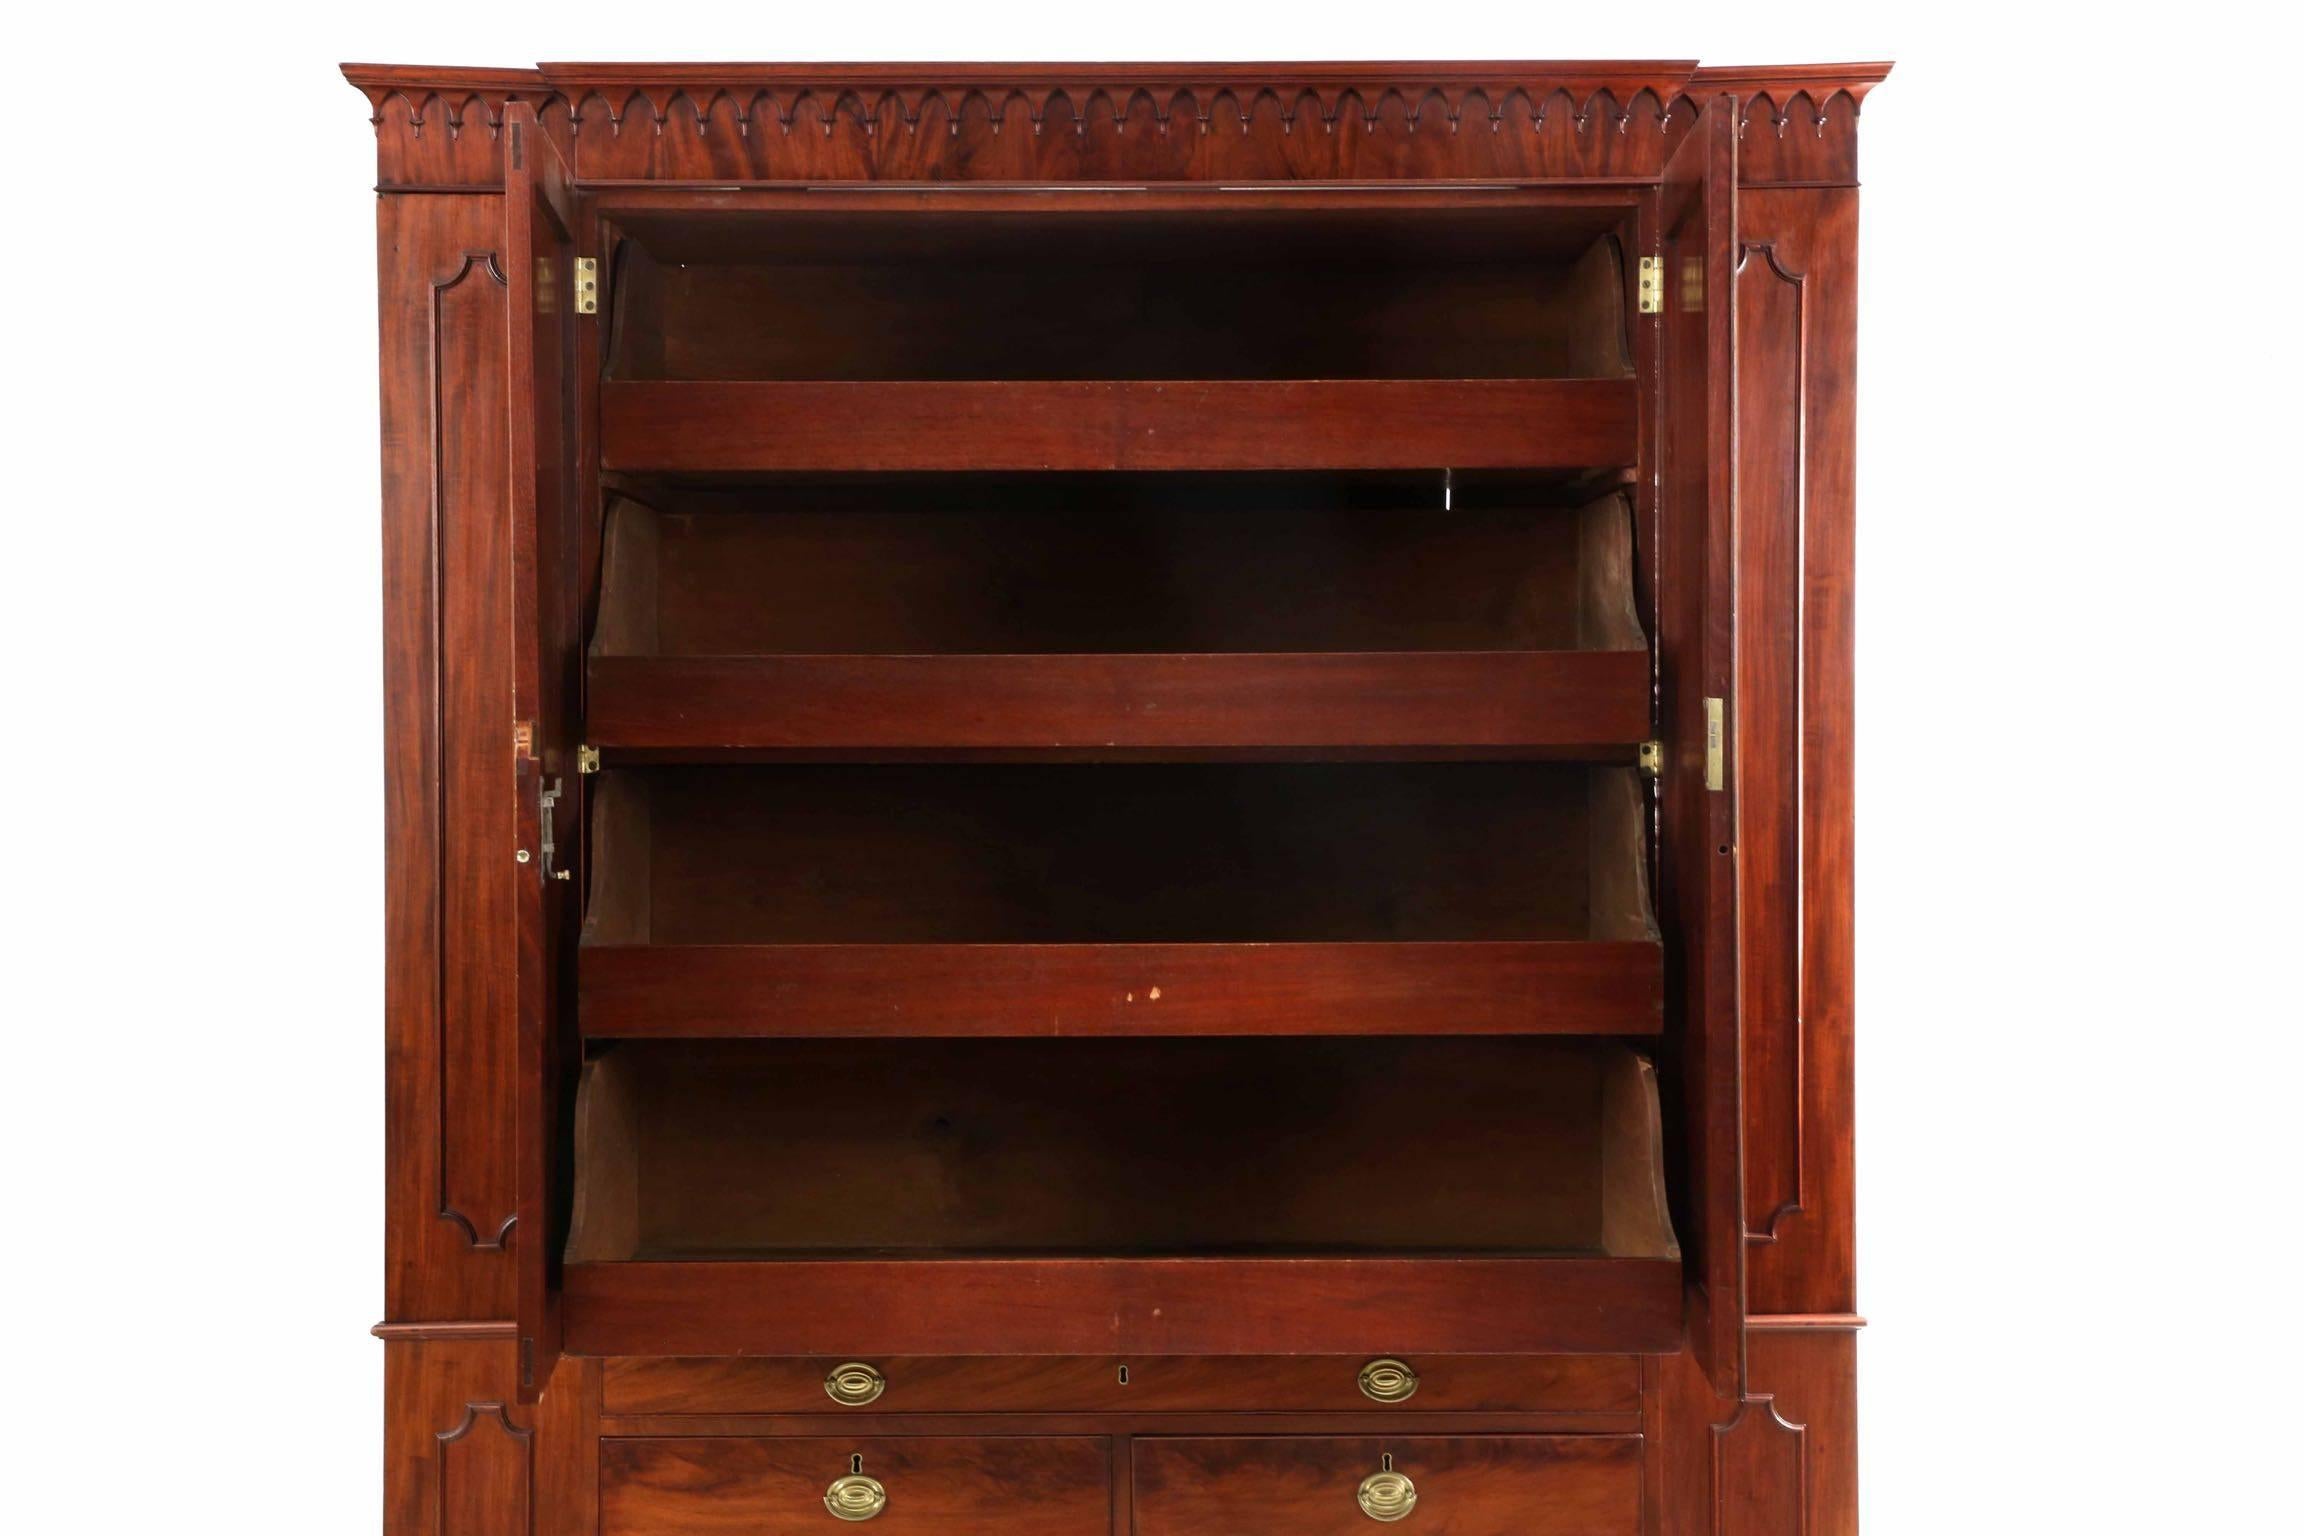 Crafted distinctly in the British tradition, this exceedingly fine piece of case furniture serves many functions: A linen press, a chest of drawers, a secretary desk and is flanked by wardrobe wings. The quality is self evident, the craftsman